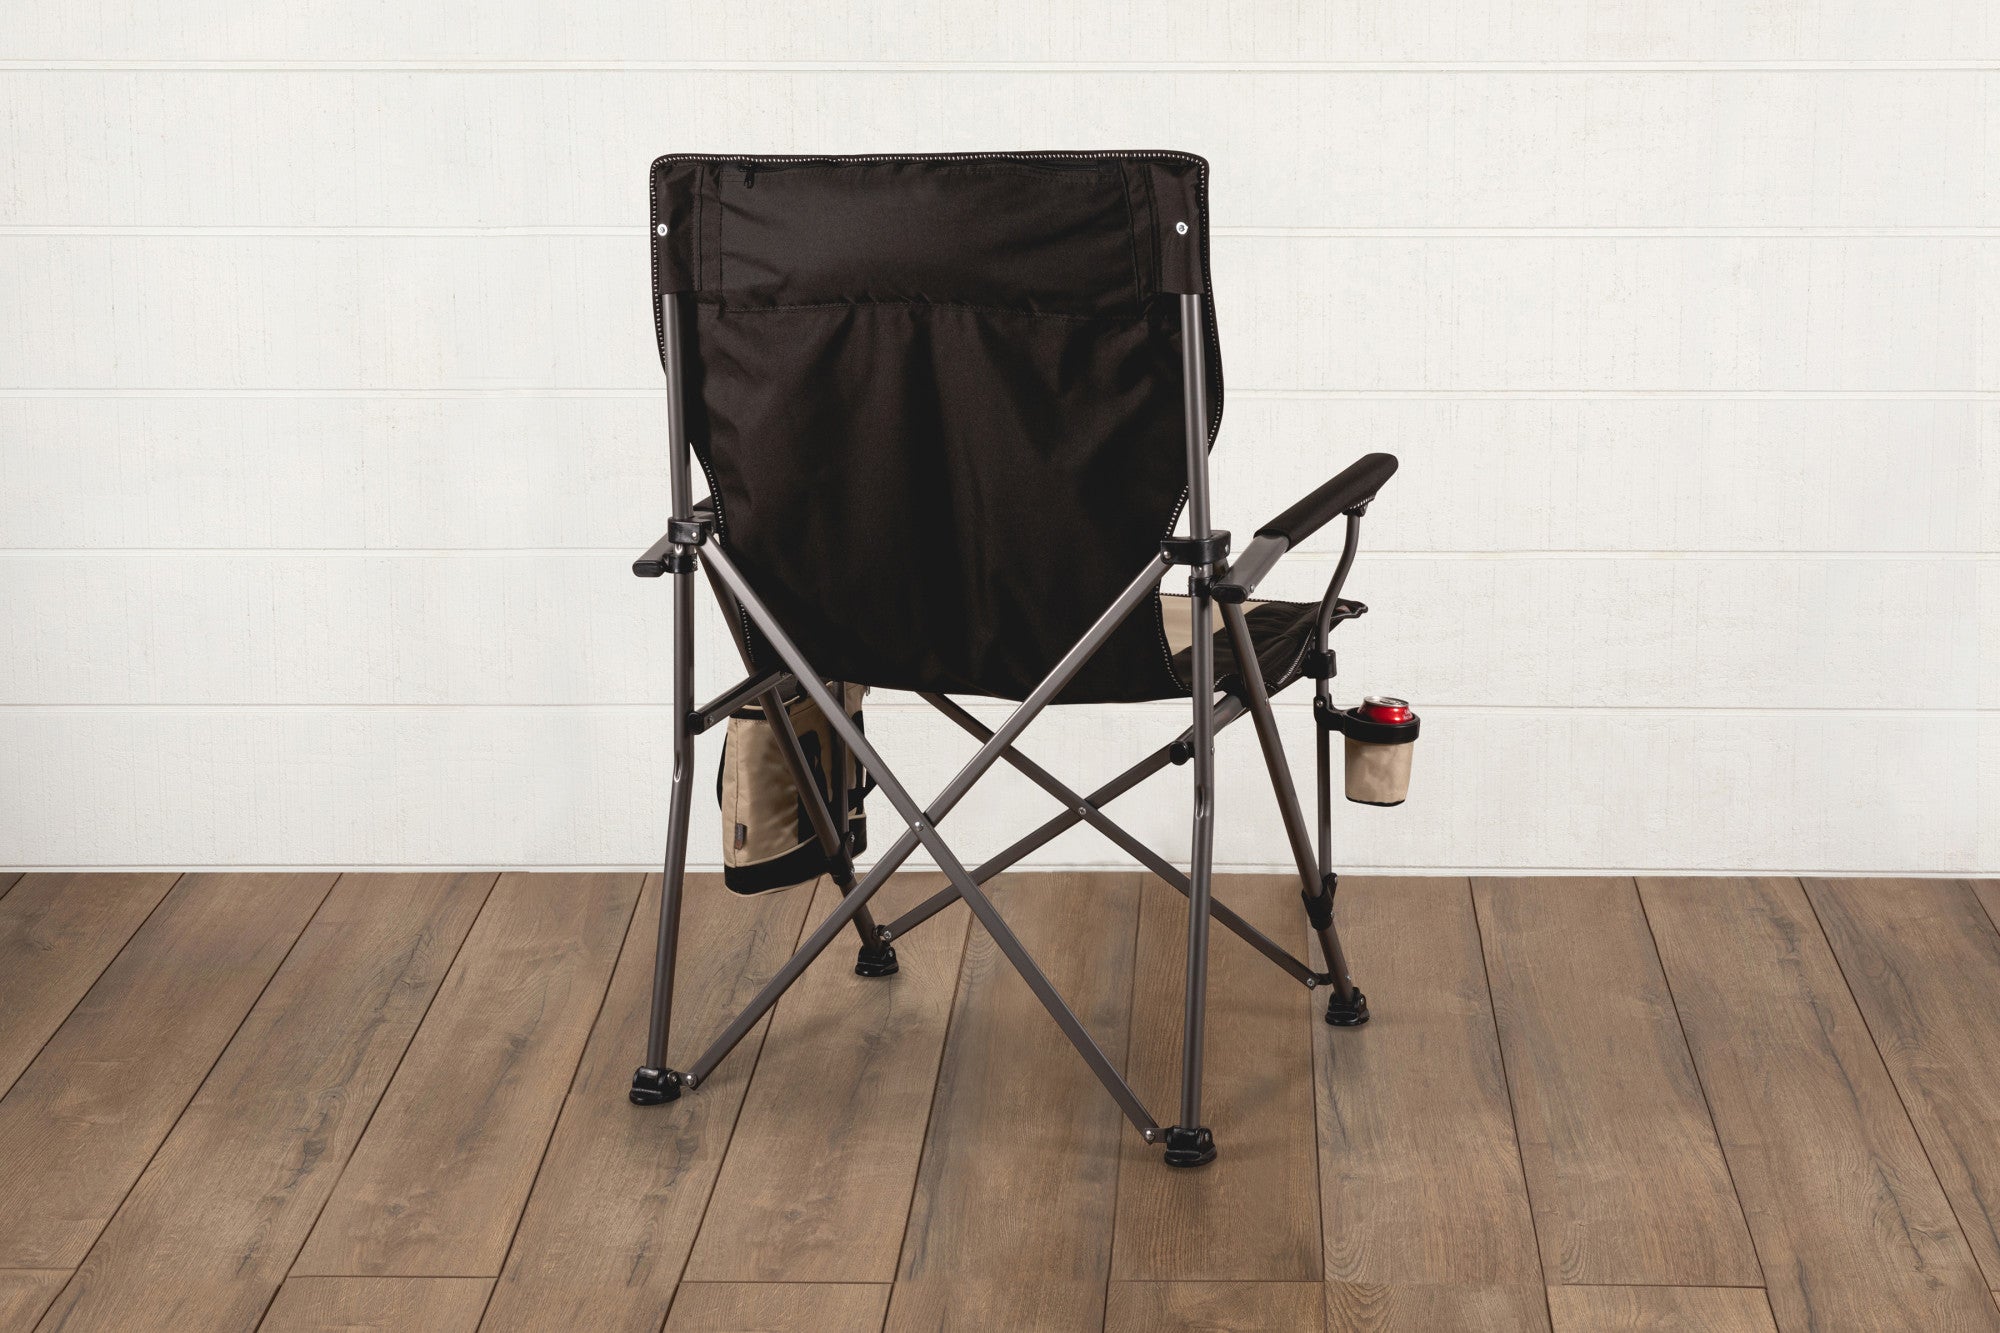 Chicago Bears - Big Bear XXL Camping Chair with Cooler